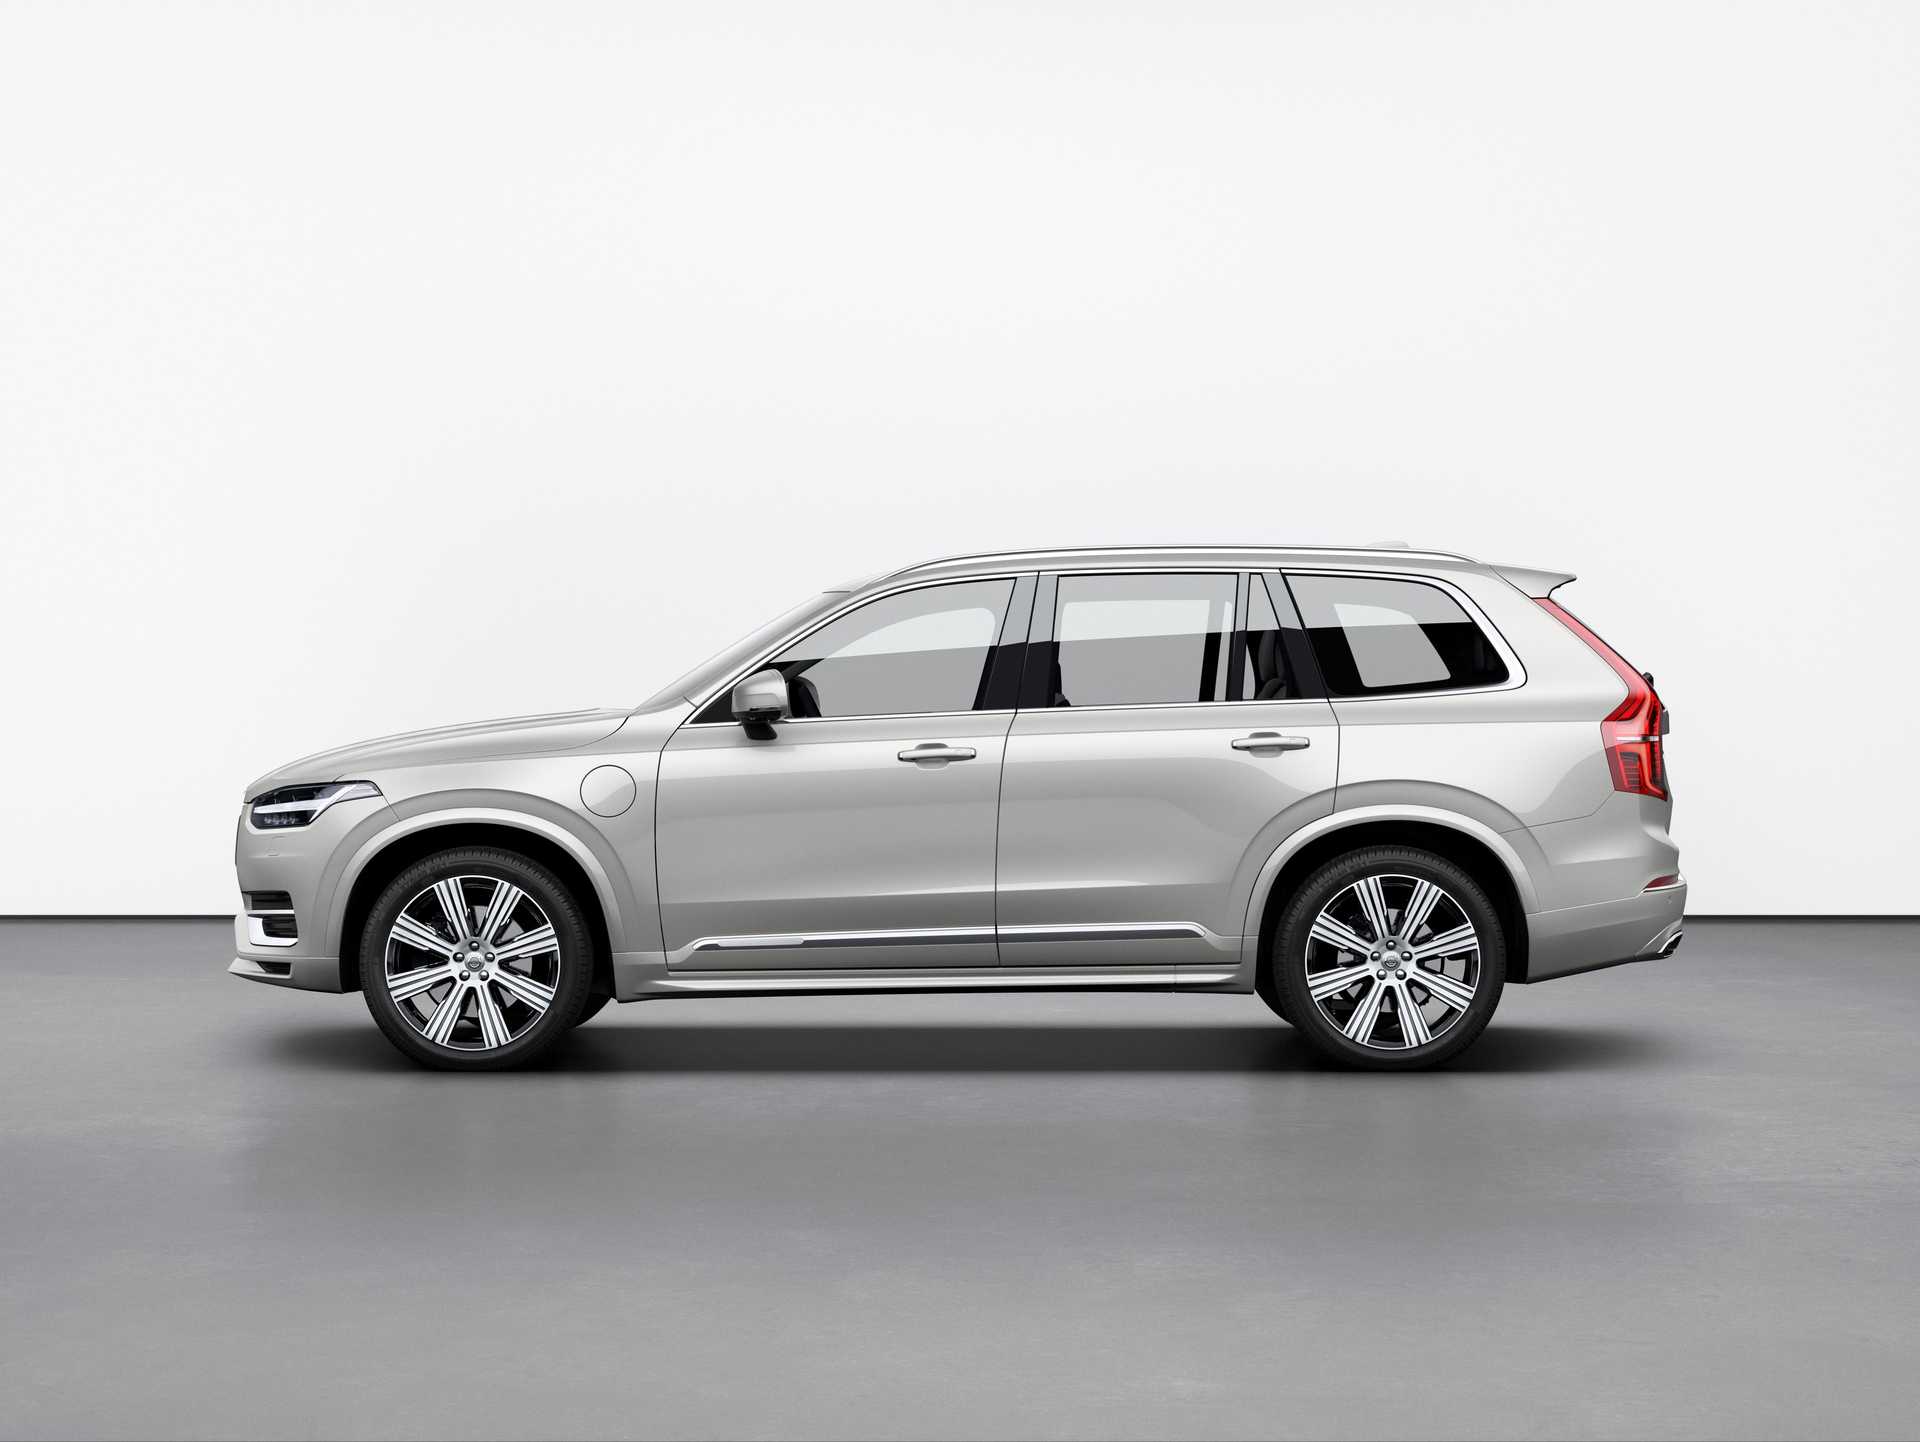 Fichiers Tuning Haute Qualité volvo XC90 2.0 T8 Twin Engine 407hp